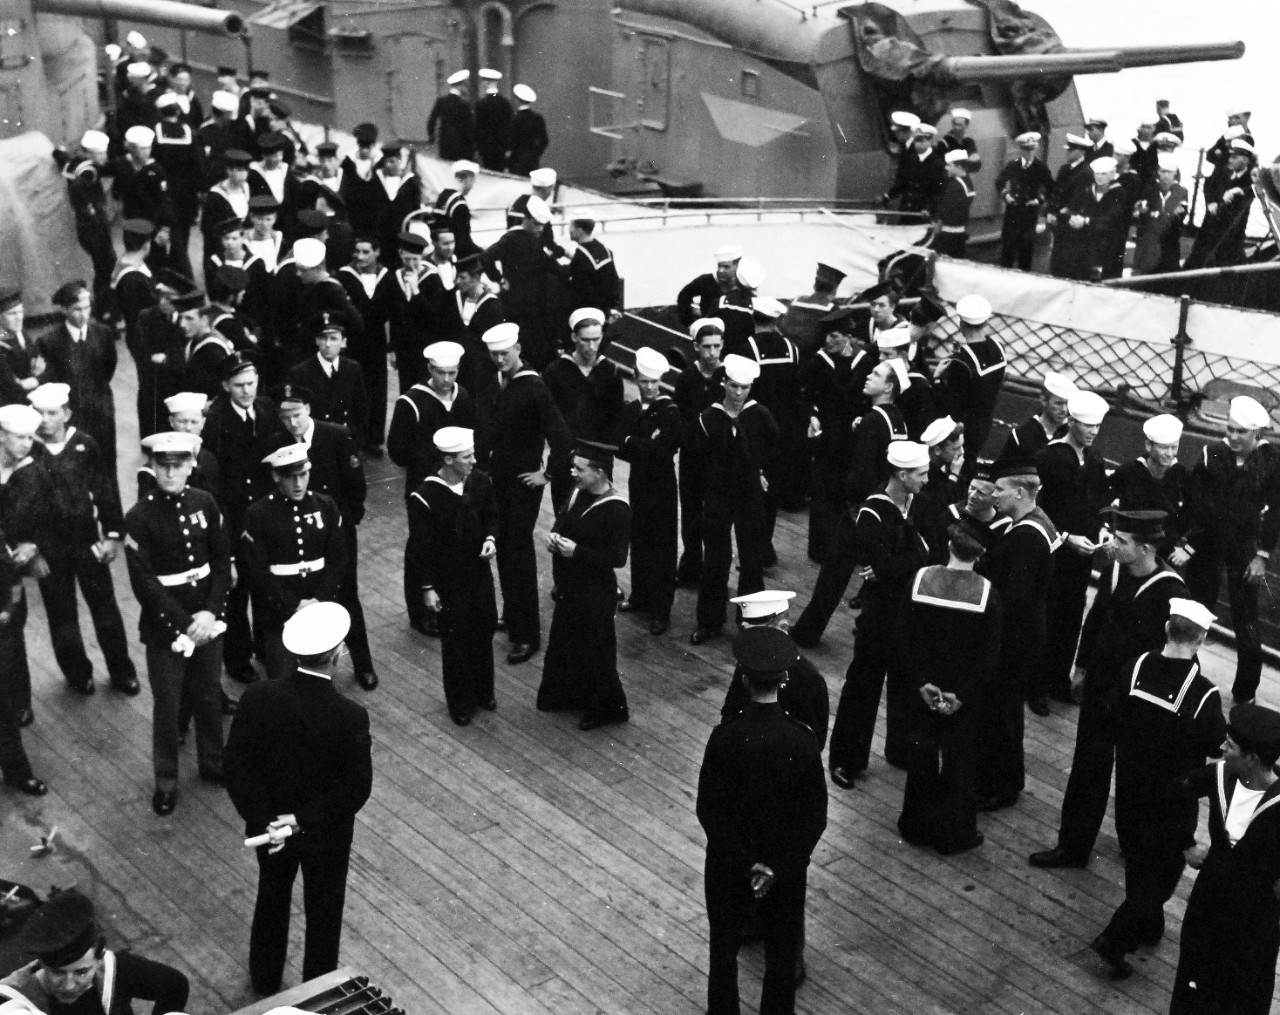 80-G-26849: Atlantic Charter, August 1941.  President Franklin D. Roosevelt and Prime Minister Winston S. Churchill and high-ranking naval and military men of both nations at divine services onboard Royal Navy battleship HMS Prince of Wales during the Atlantic Charter.  They are shown mingling on deck.   Photograph released August 10, 1941.   Official U.S. Navy Photograph, now in the collections of the National Archives.  (2016/03/22).